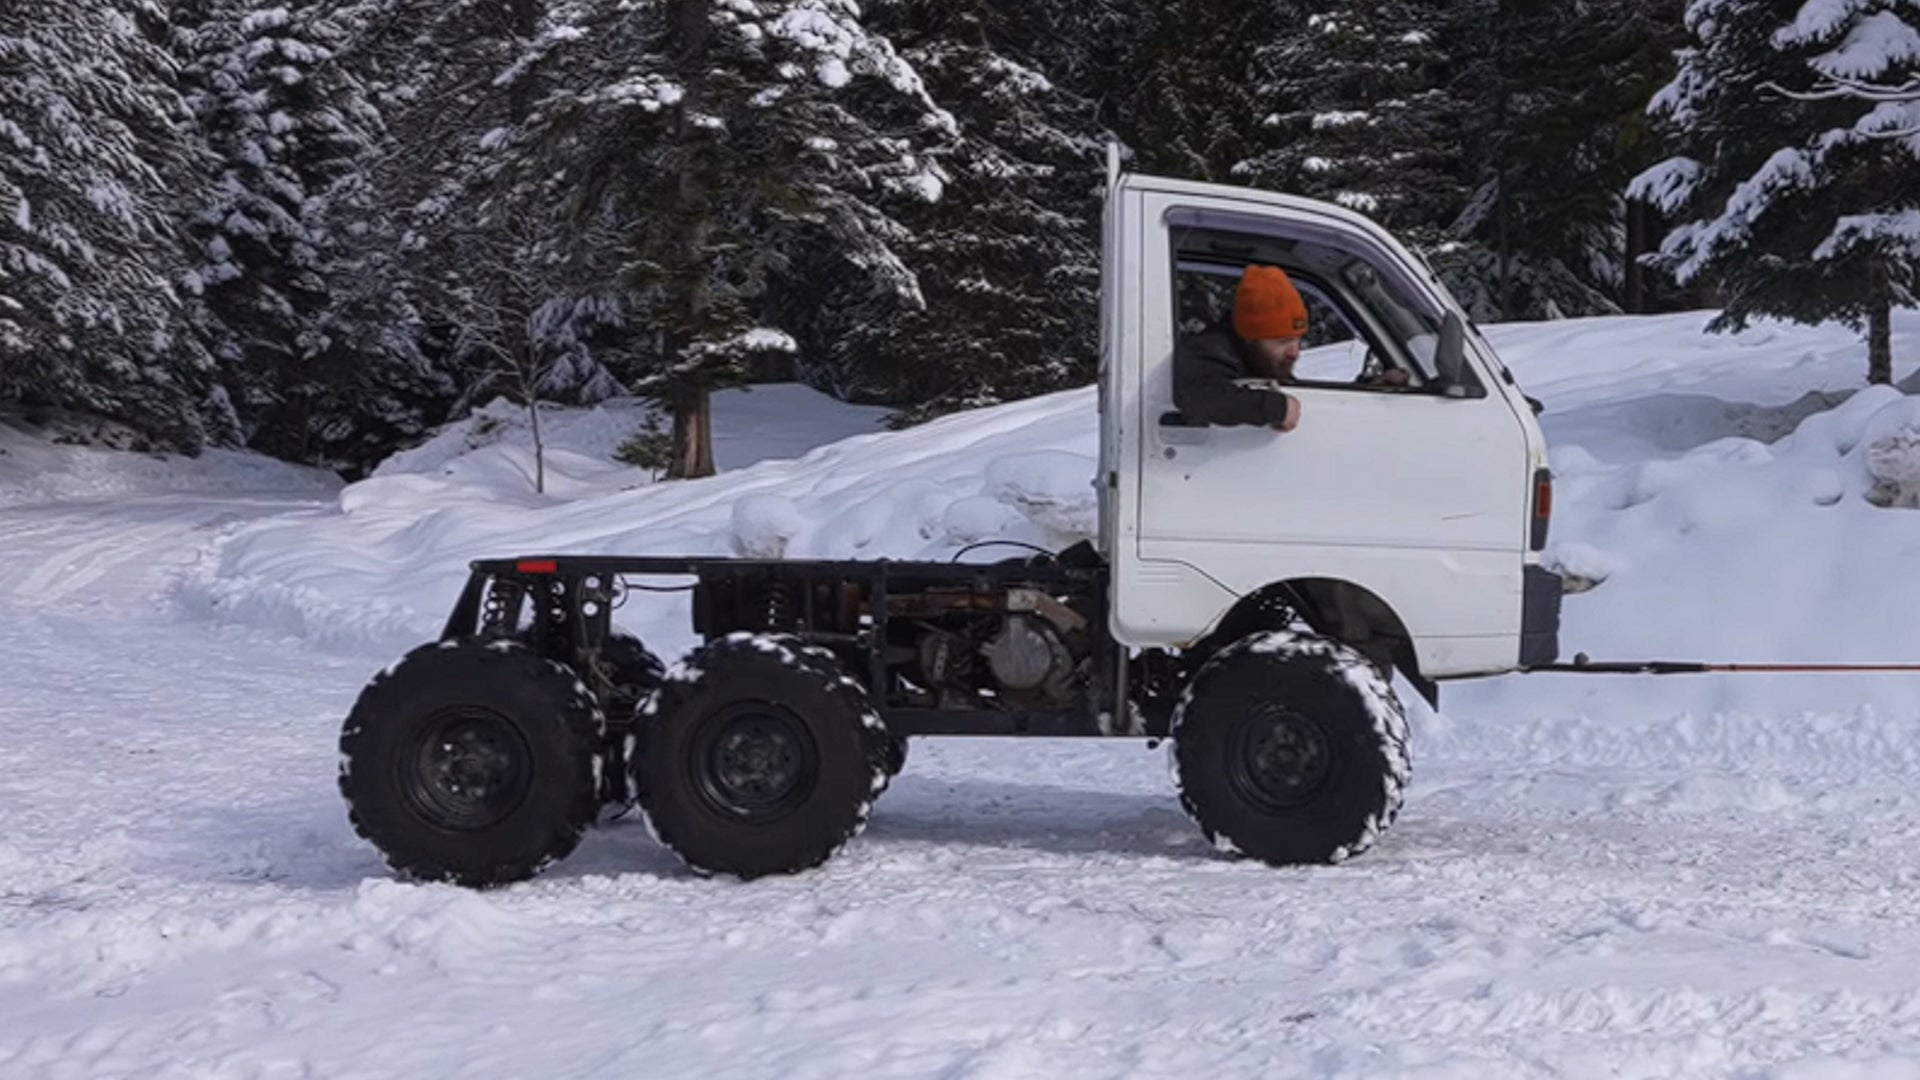 This 6×6 Kei Truck Is Actually a Polaris SxS With a Mitsubishi Minicab Body